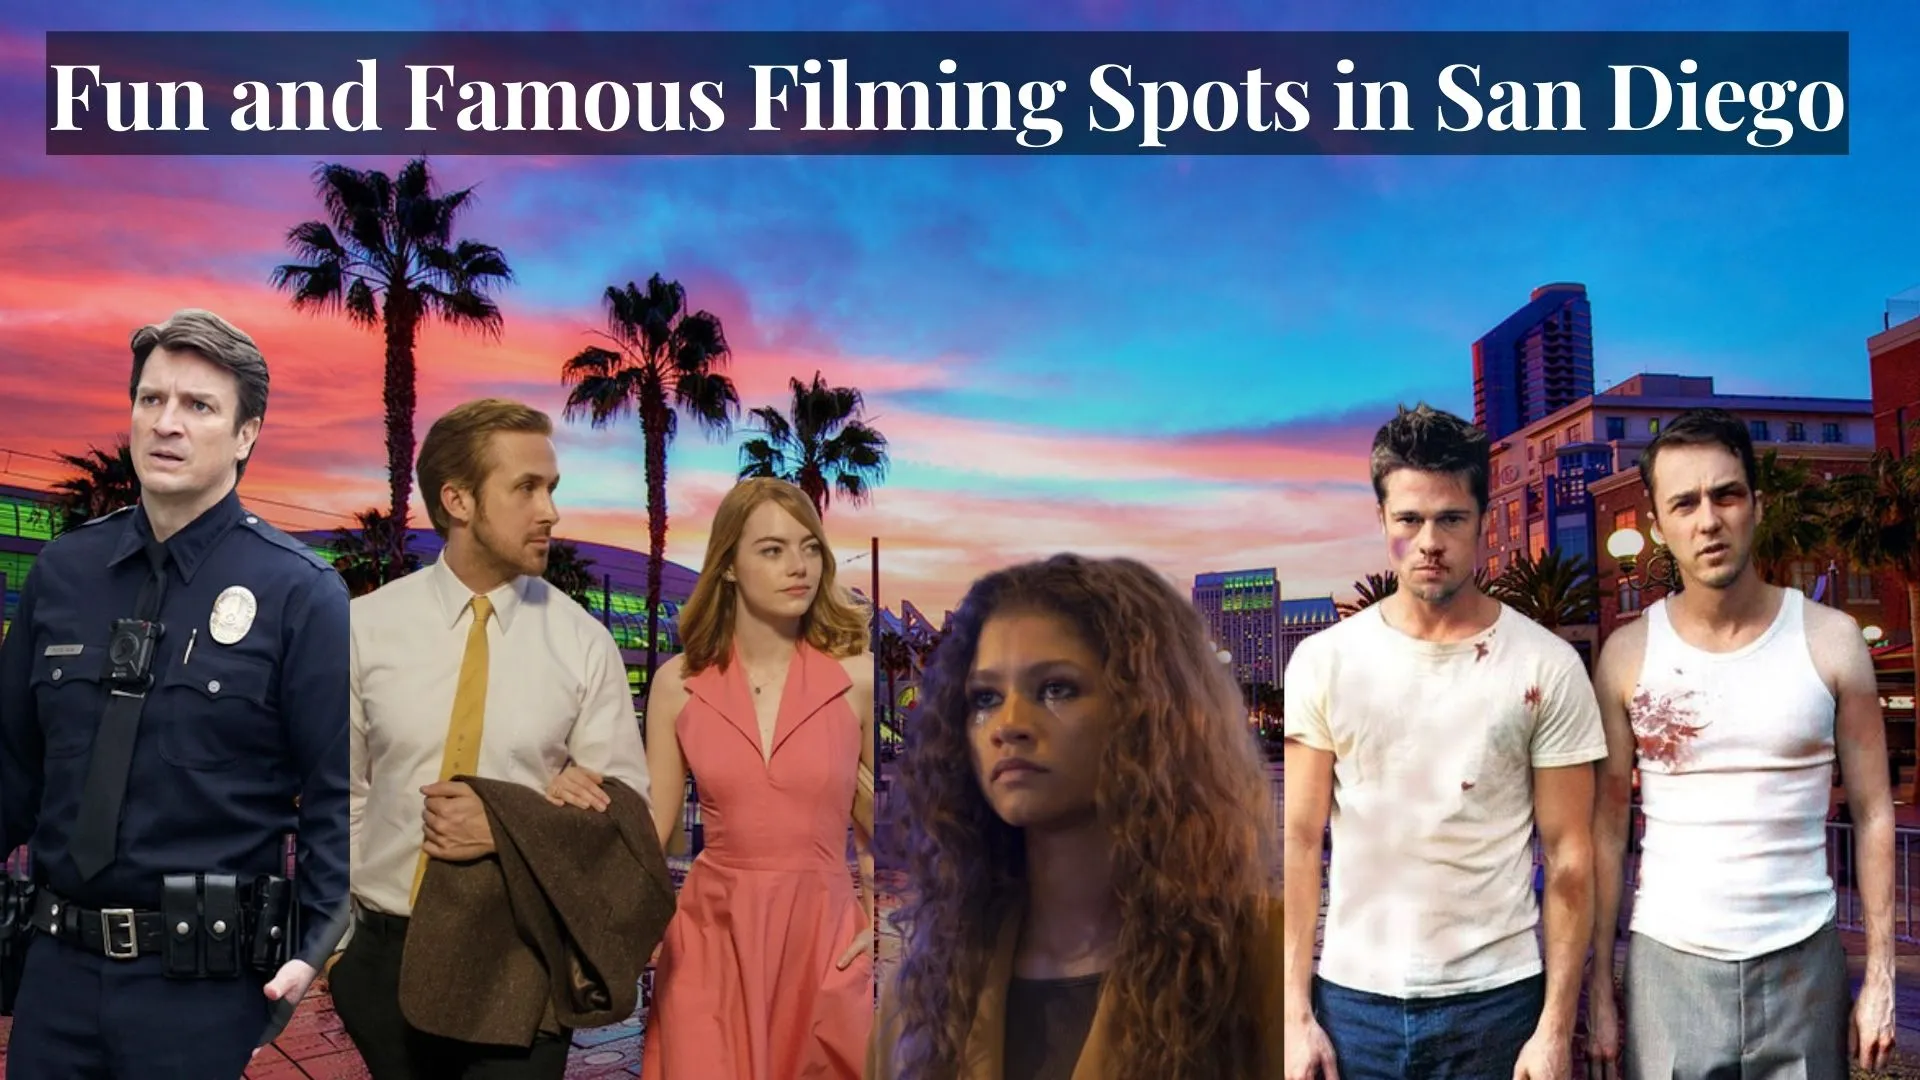 Fun and Famous Filming Spots in San Diego